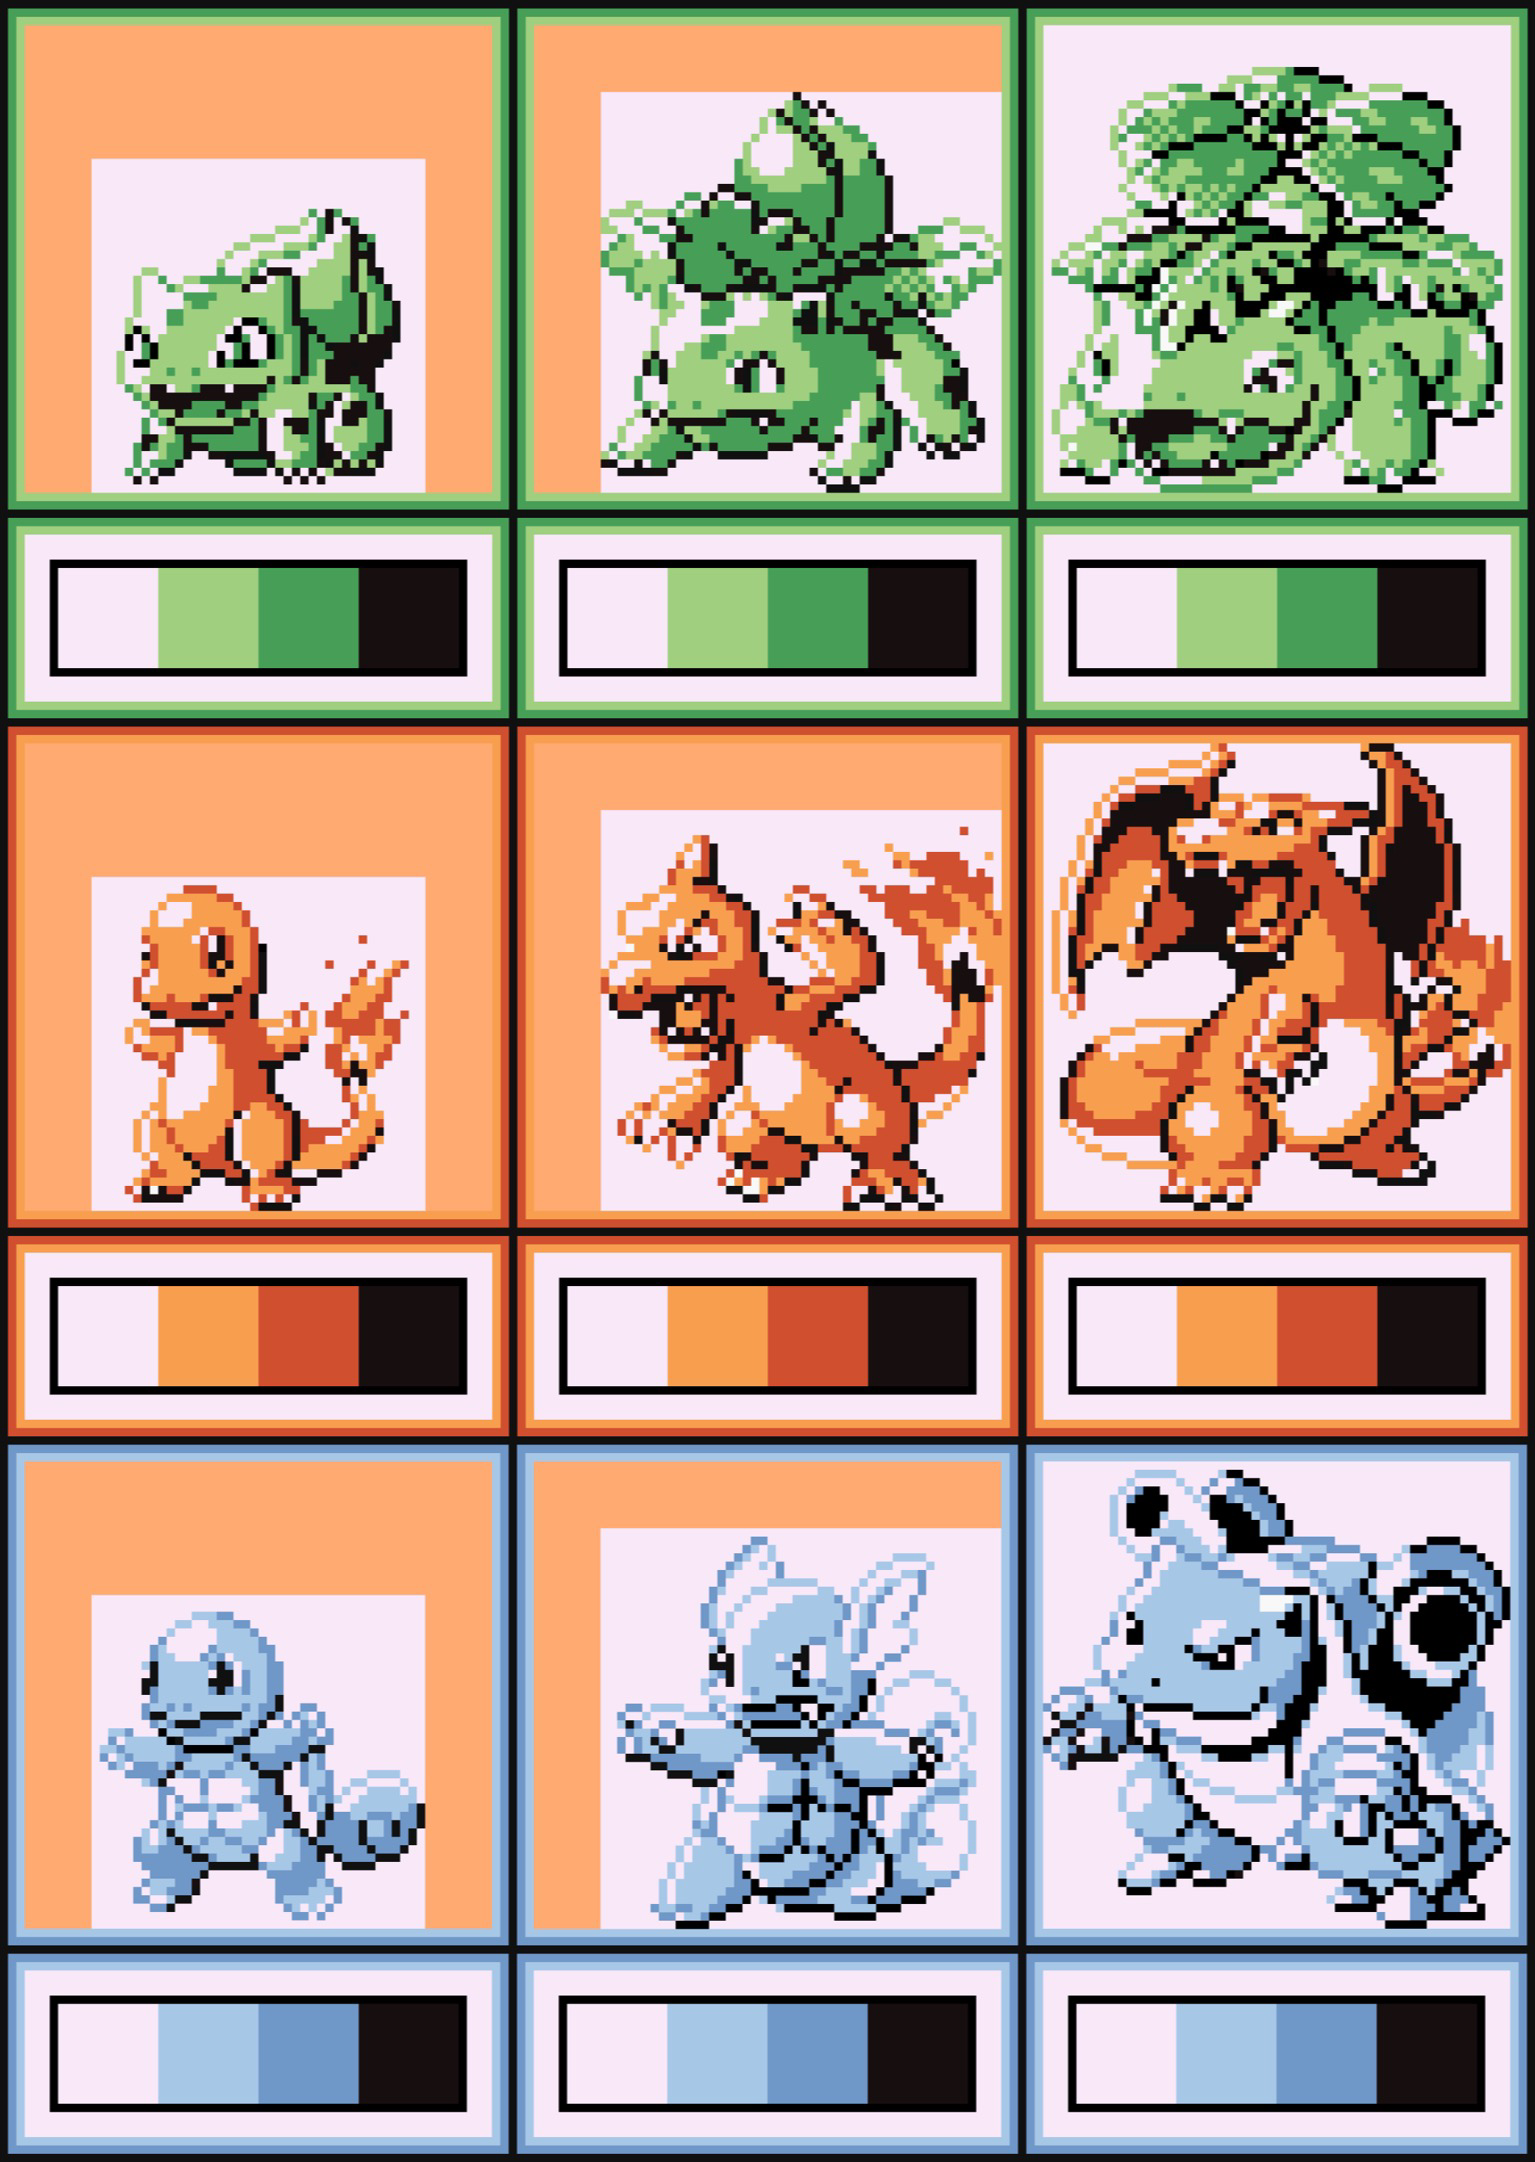 Completed New Pokemon GBA ROM HACK With Alola Starters